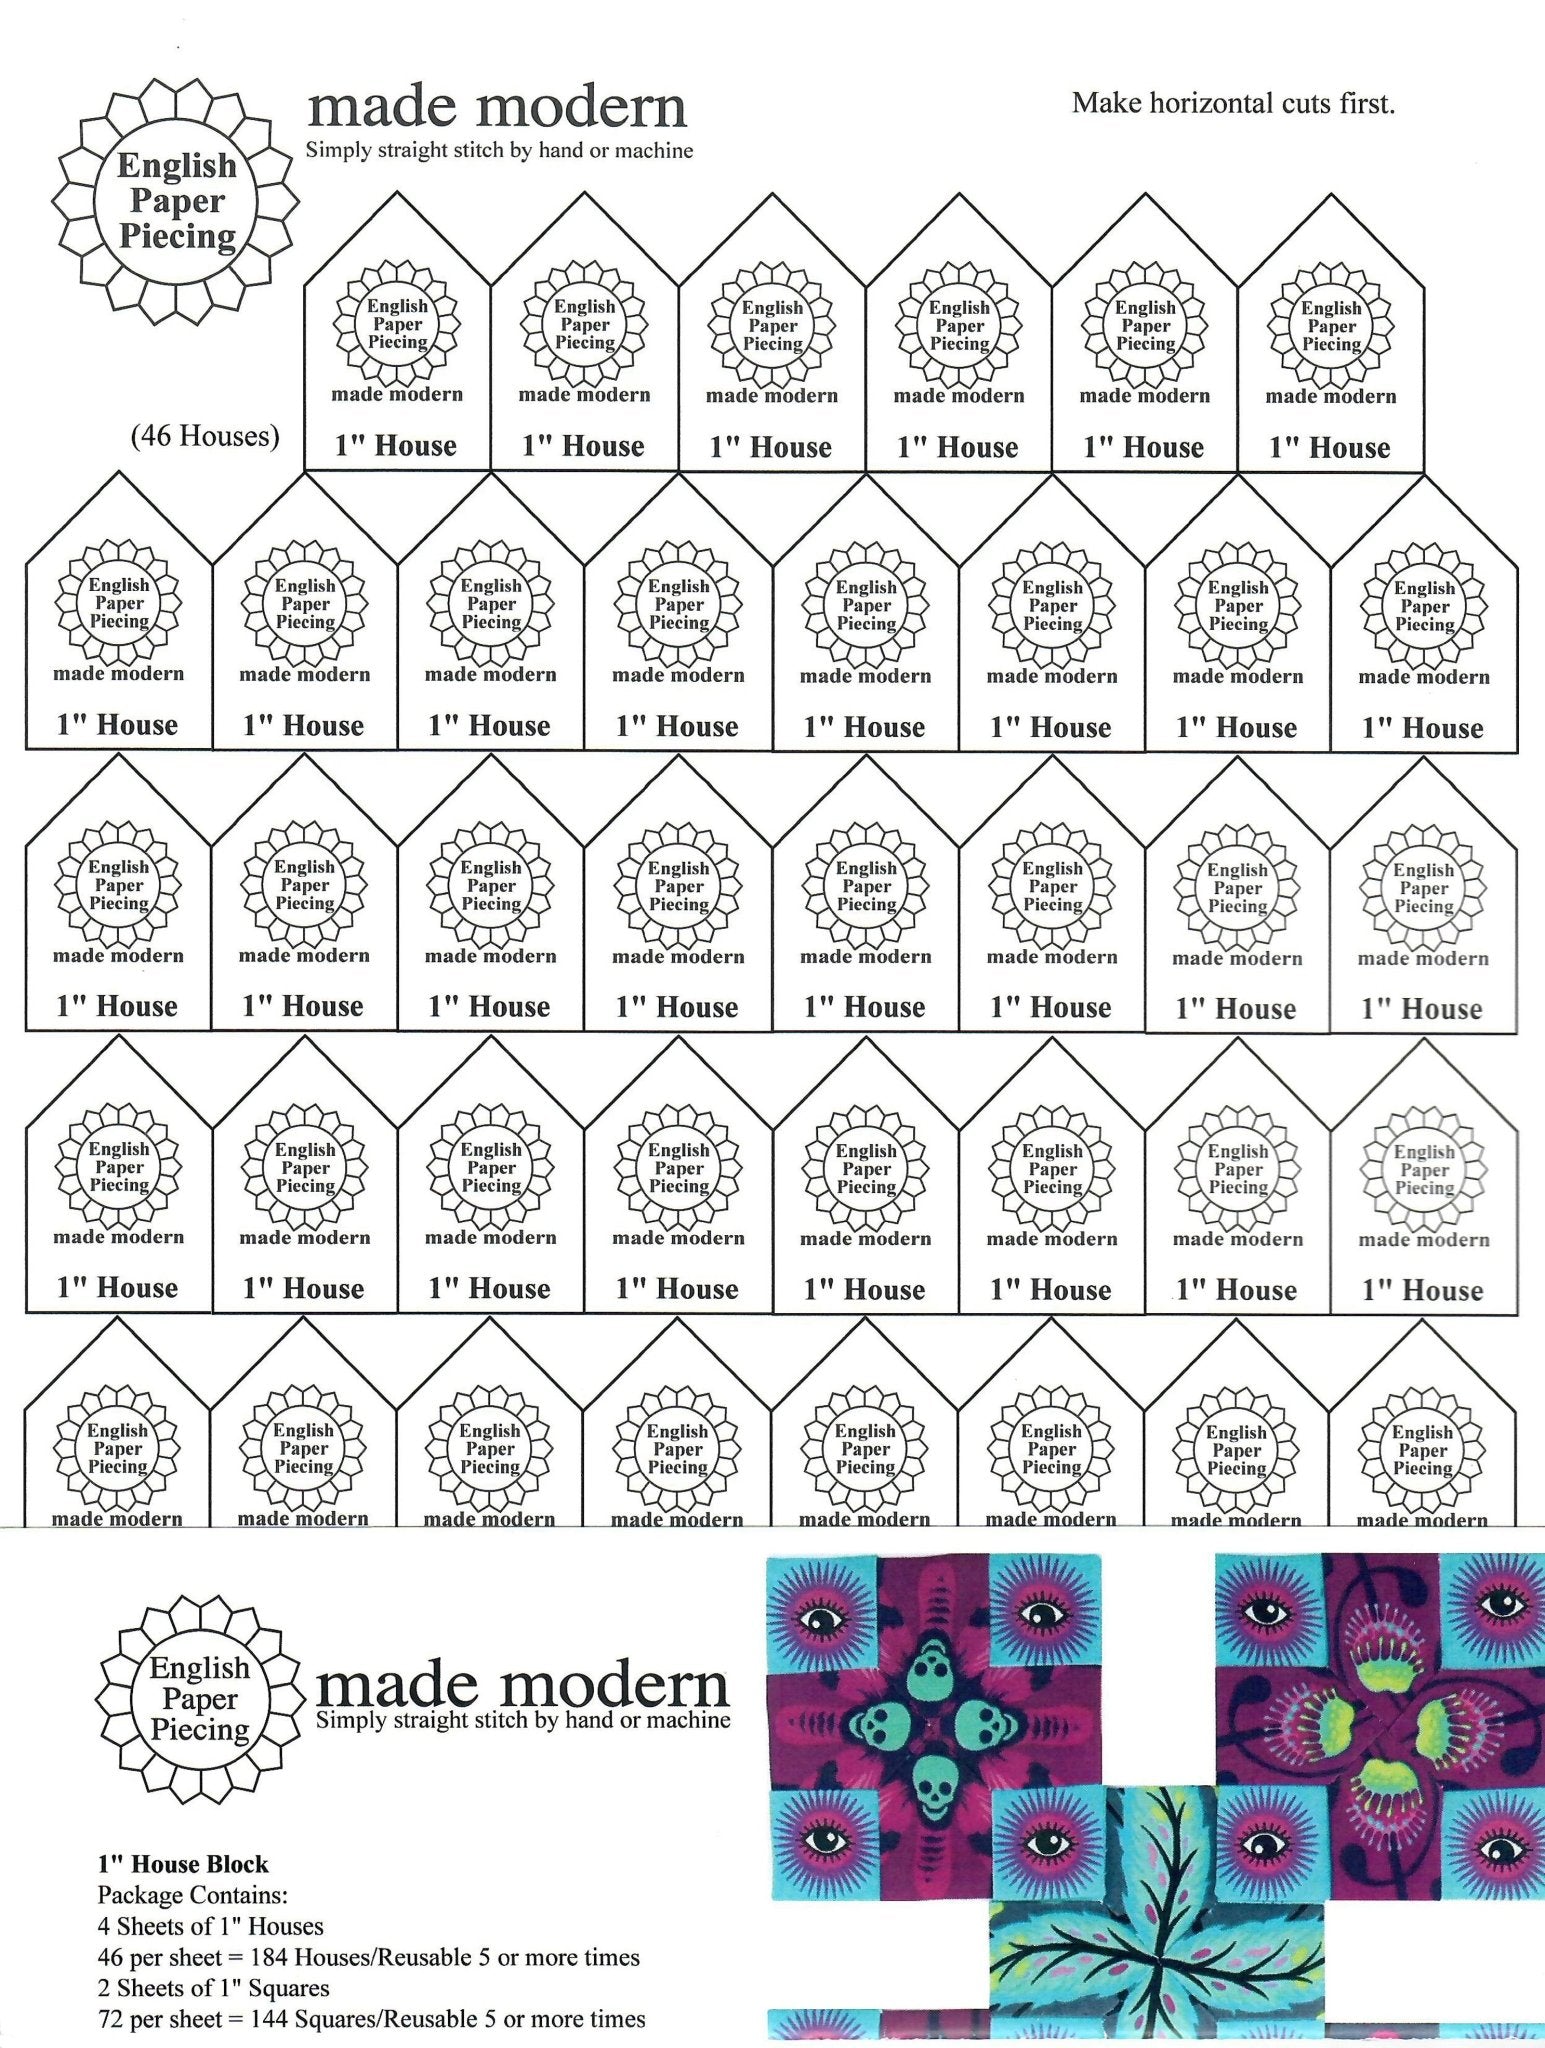 What is English Paper Piecing Made Modern? – Sewforever